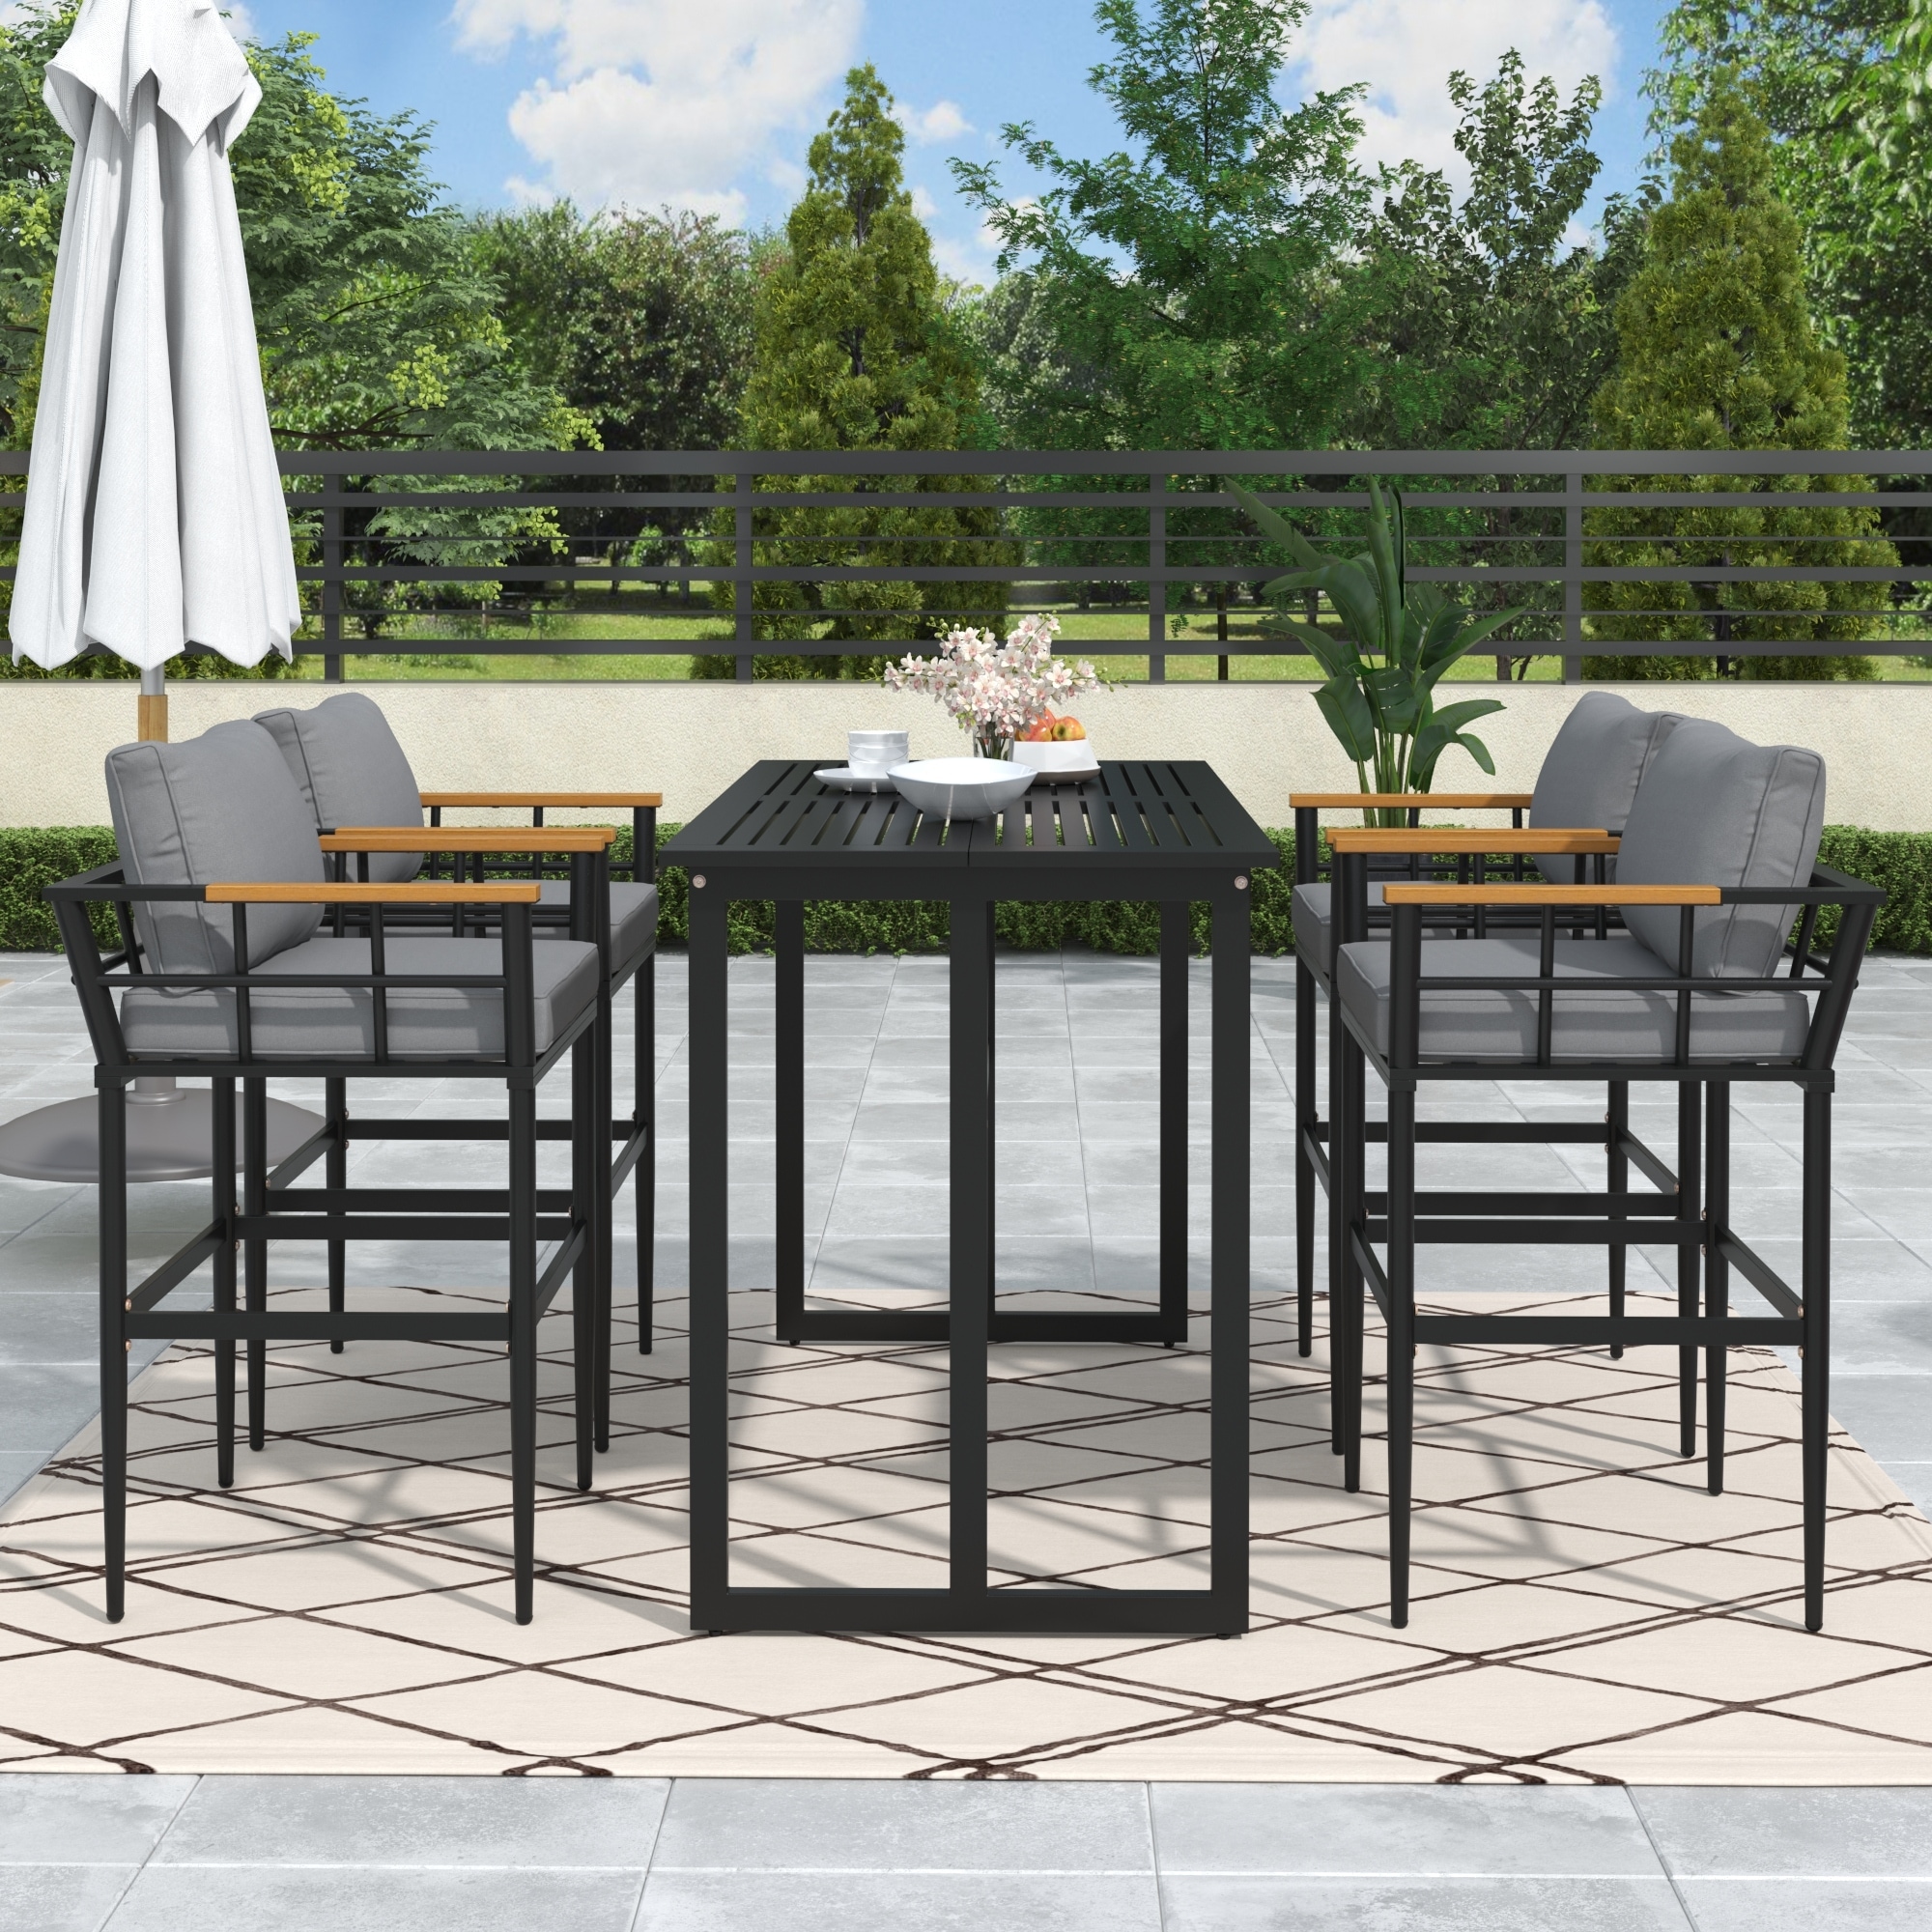 Outdoor Steel Dining Sets 5 Pcs High-leg Dining Table  Black